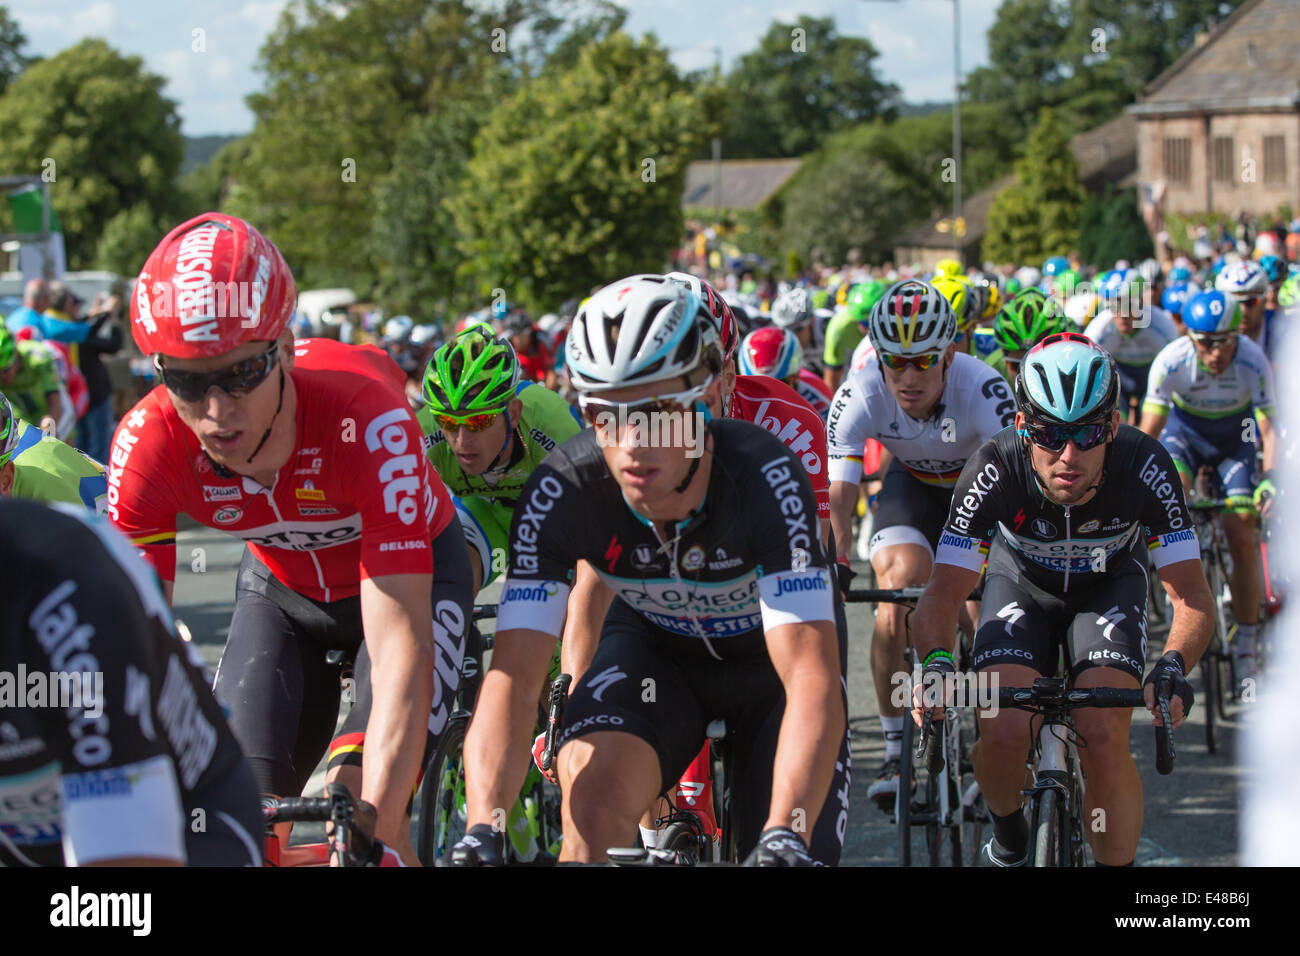 Harrogate, North Yorkshire. 5th July 2014. A tightly packed peleton enters the Yorkshire village of Killinghall, 3 miles from the day one finish in Harrogate. Copyright Ian Wray/Alamy Live News Stock Photo